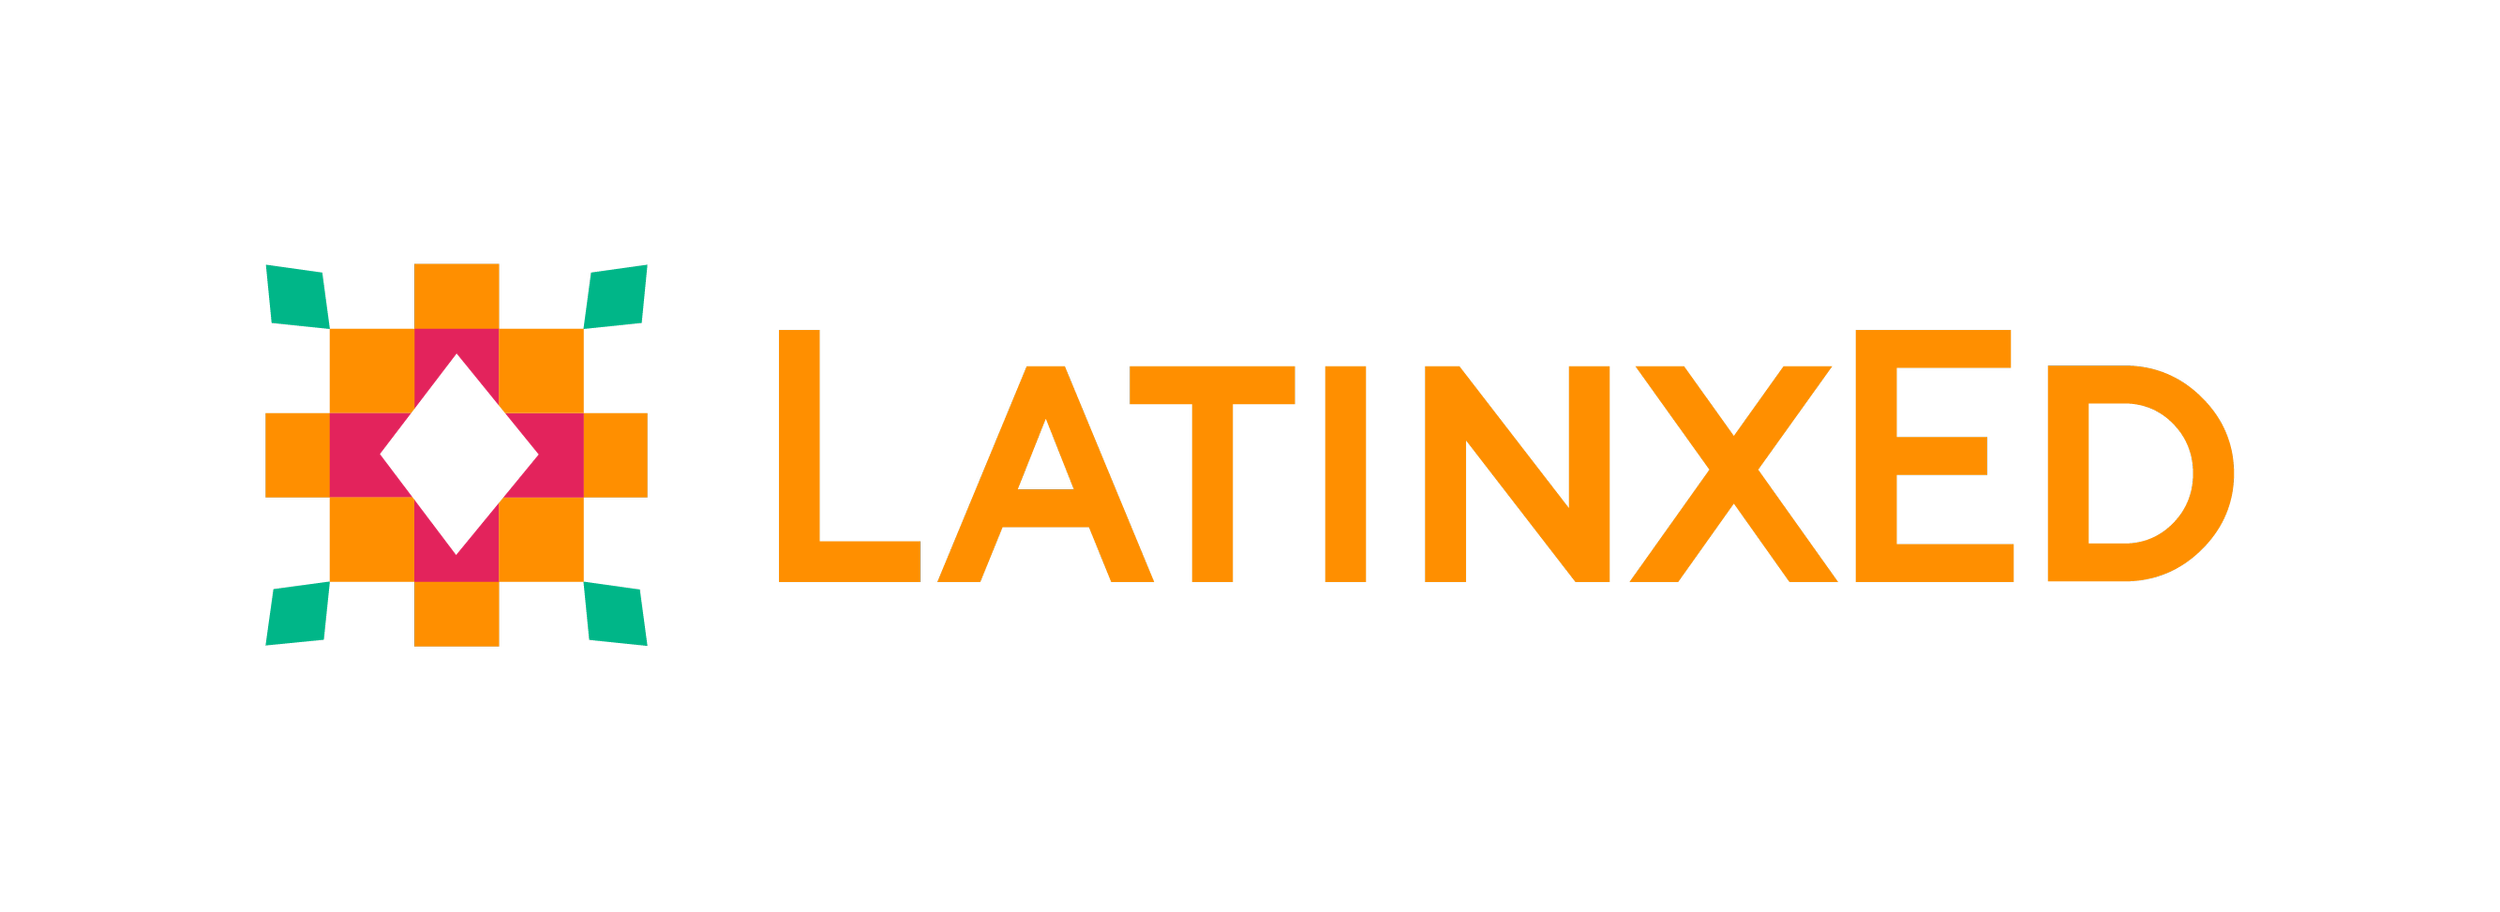 LatinxEd_Color_Horizontal (1) - Elaine Townsend Utin.png